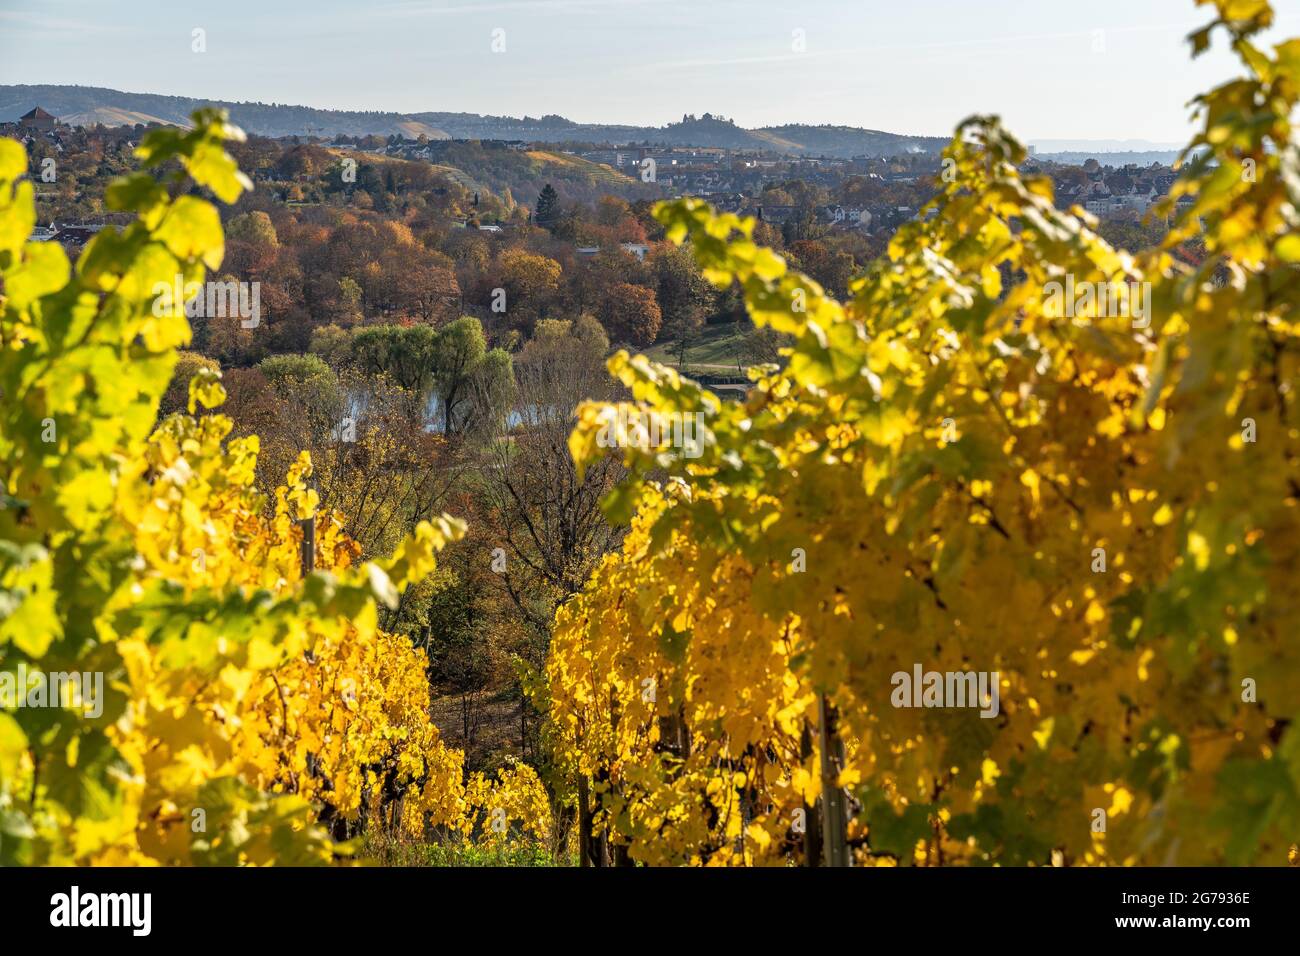 Europe, Germany, Baden-Wuerttemberg, Stuttgart, view from the Cannstatter Zuckerle vineyard to the park at Max-Eyth-See Stock Photo